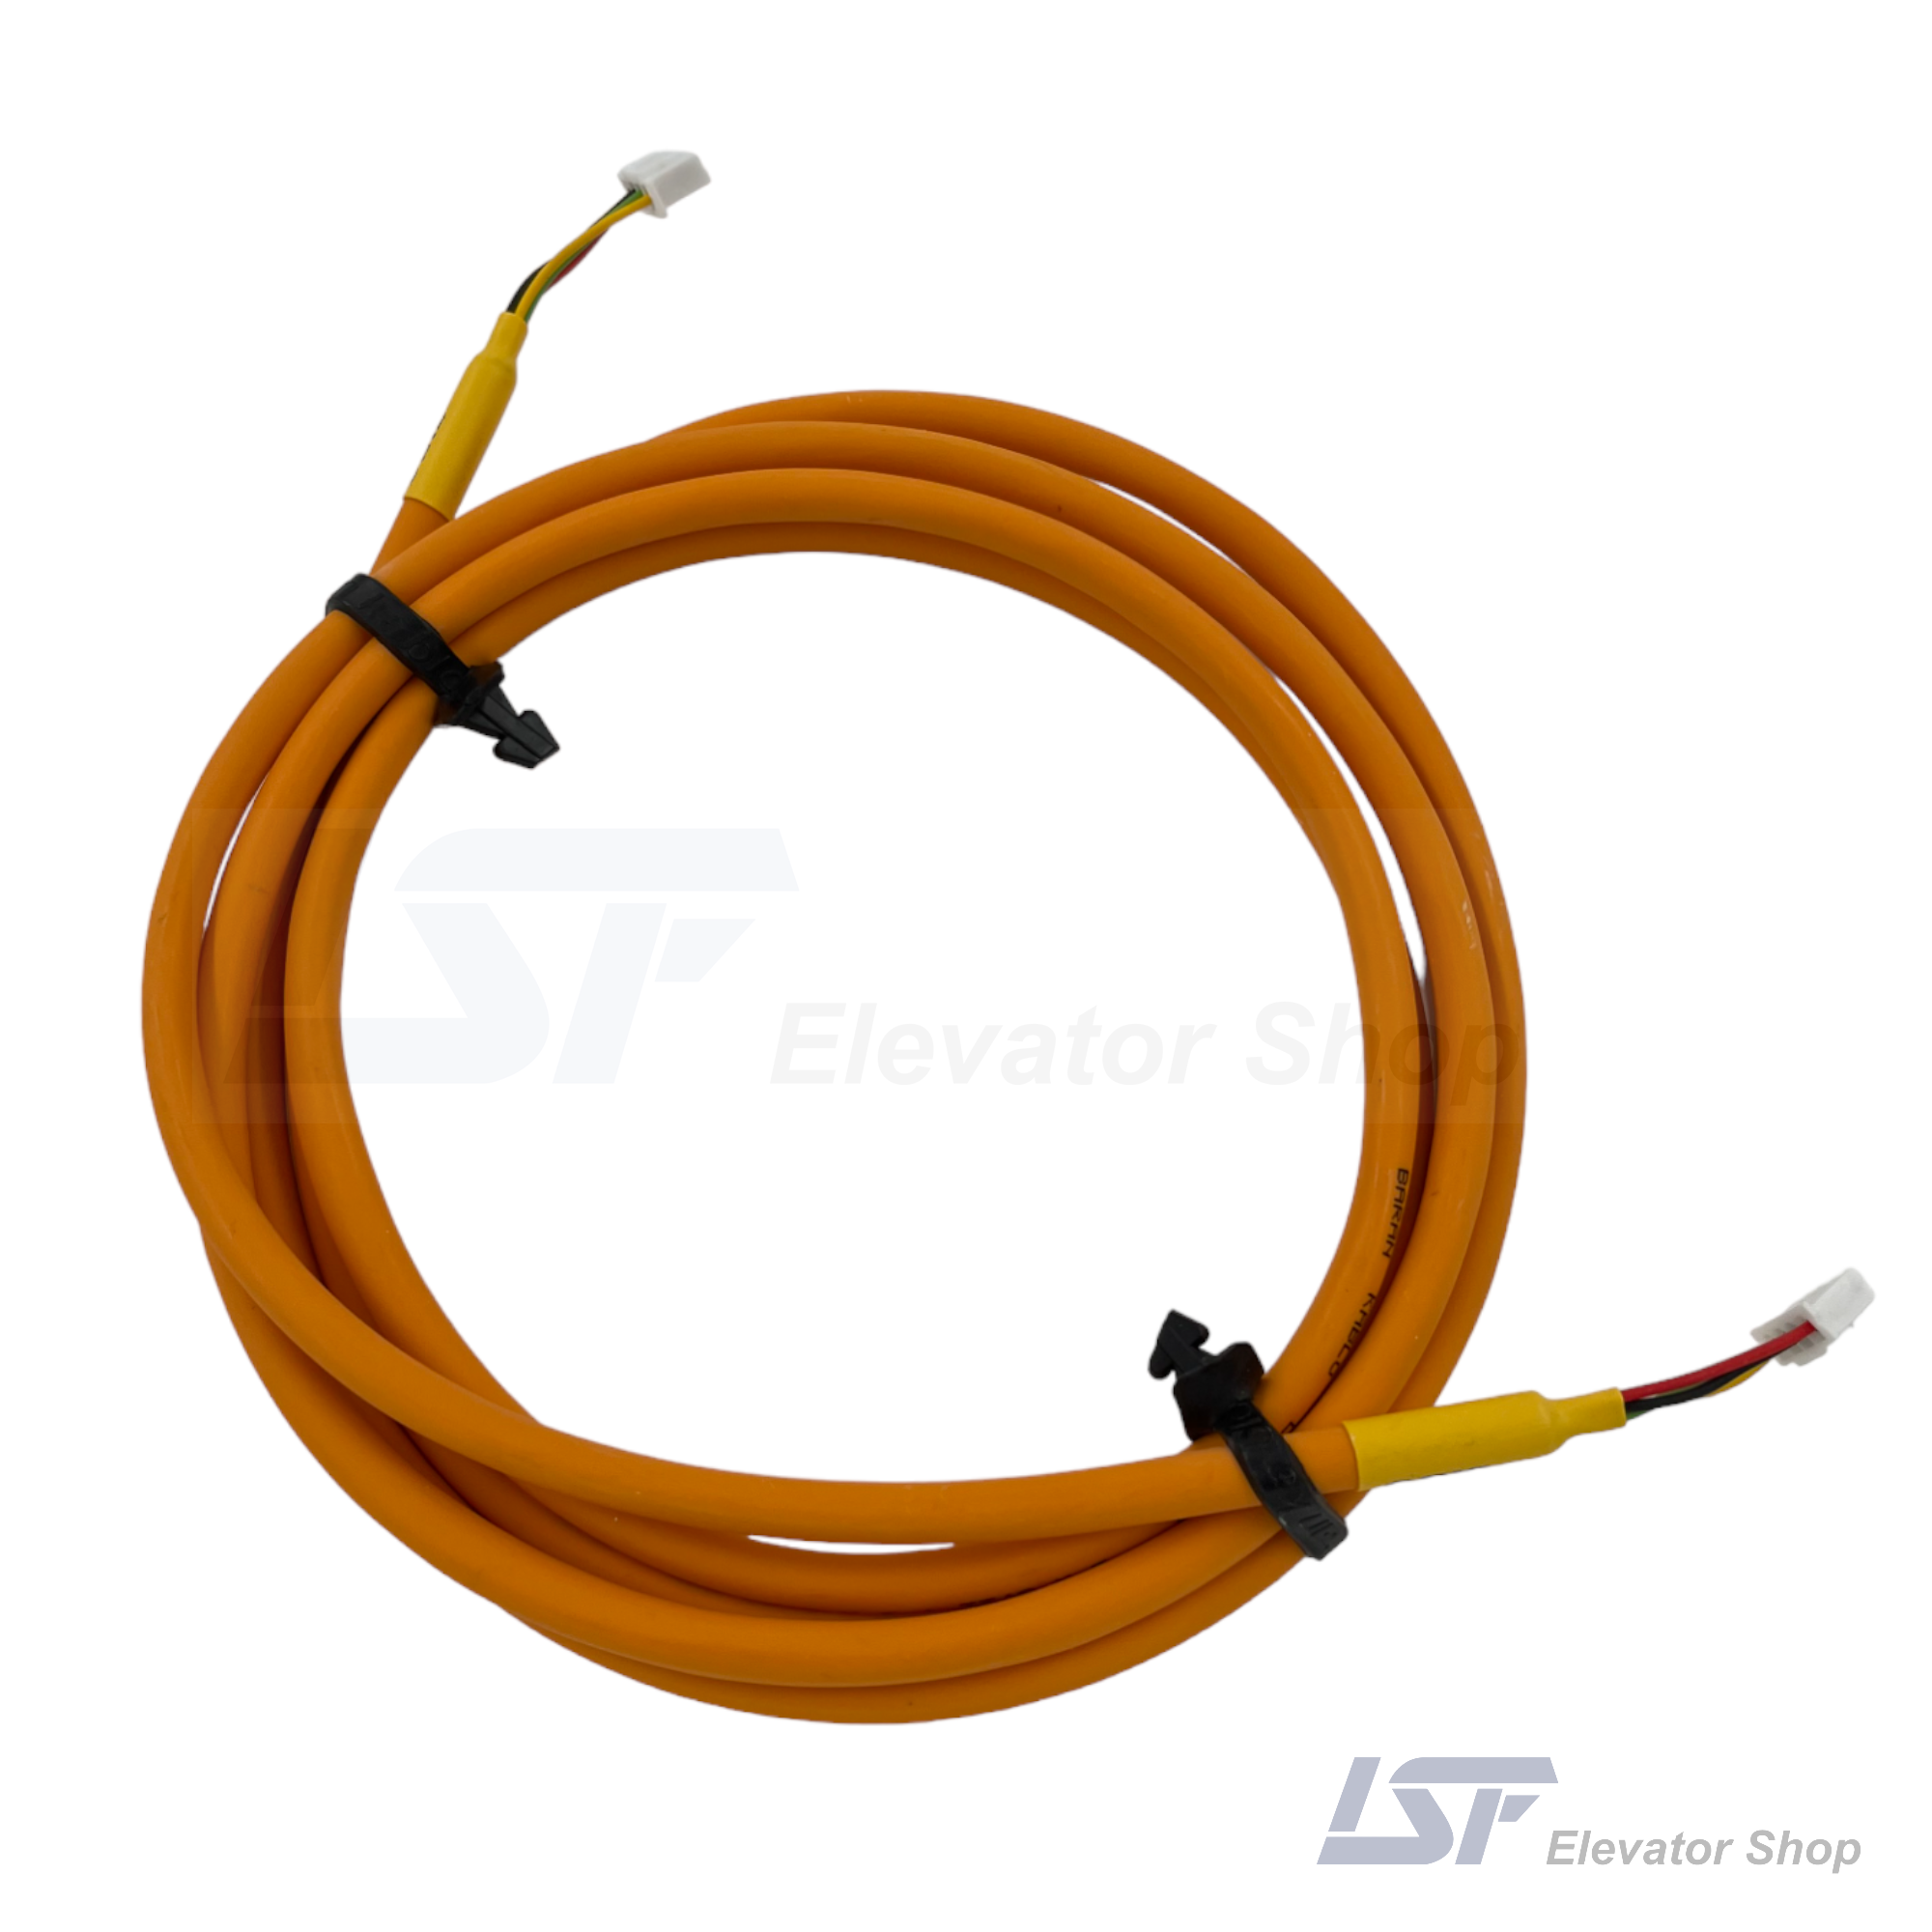 Arkel KBL-CBl2 Can-bus Cable 2 m.(For Connec. From Main Line to Landings with 2,5 mm Con.) 3,00